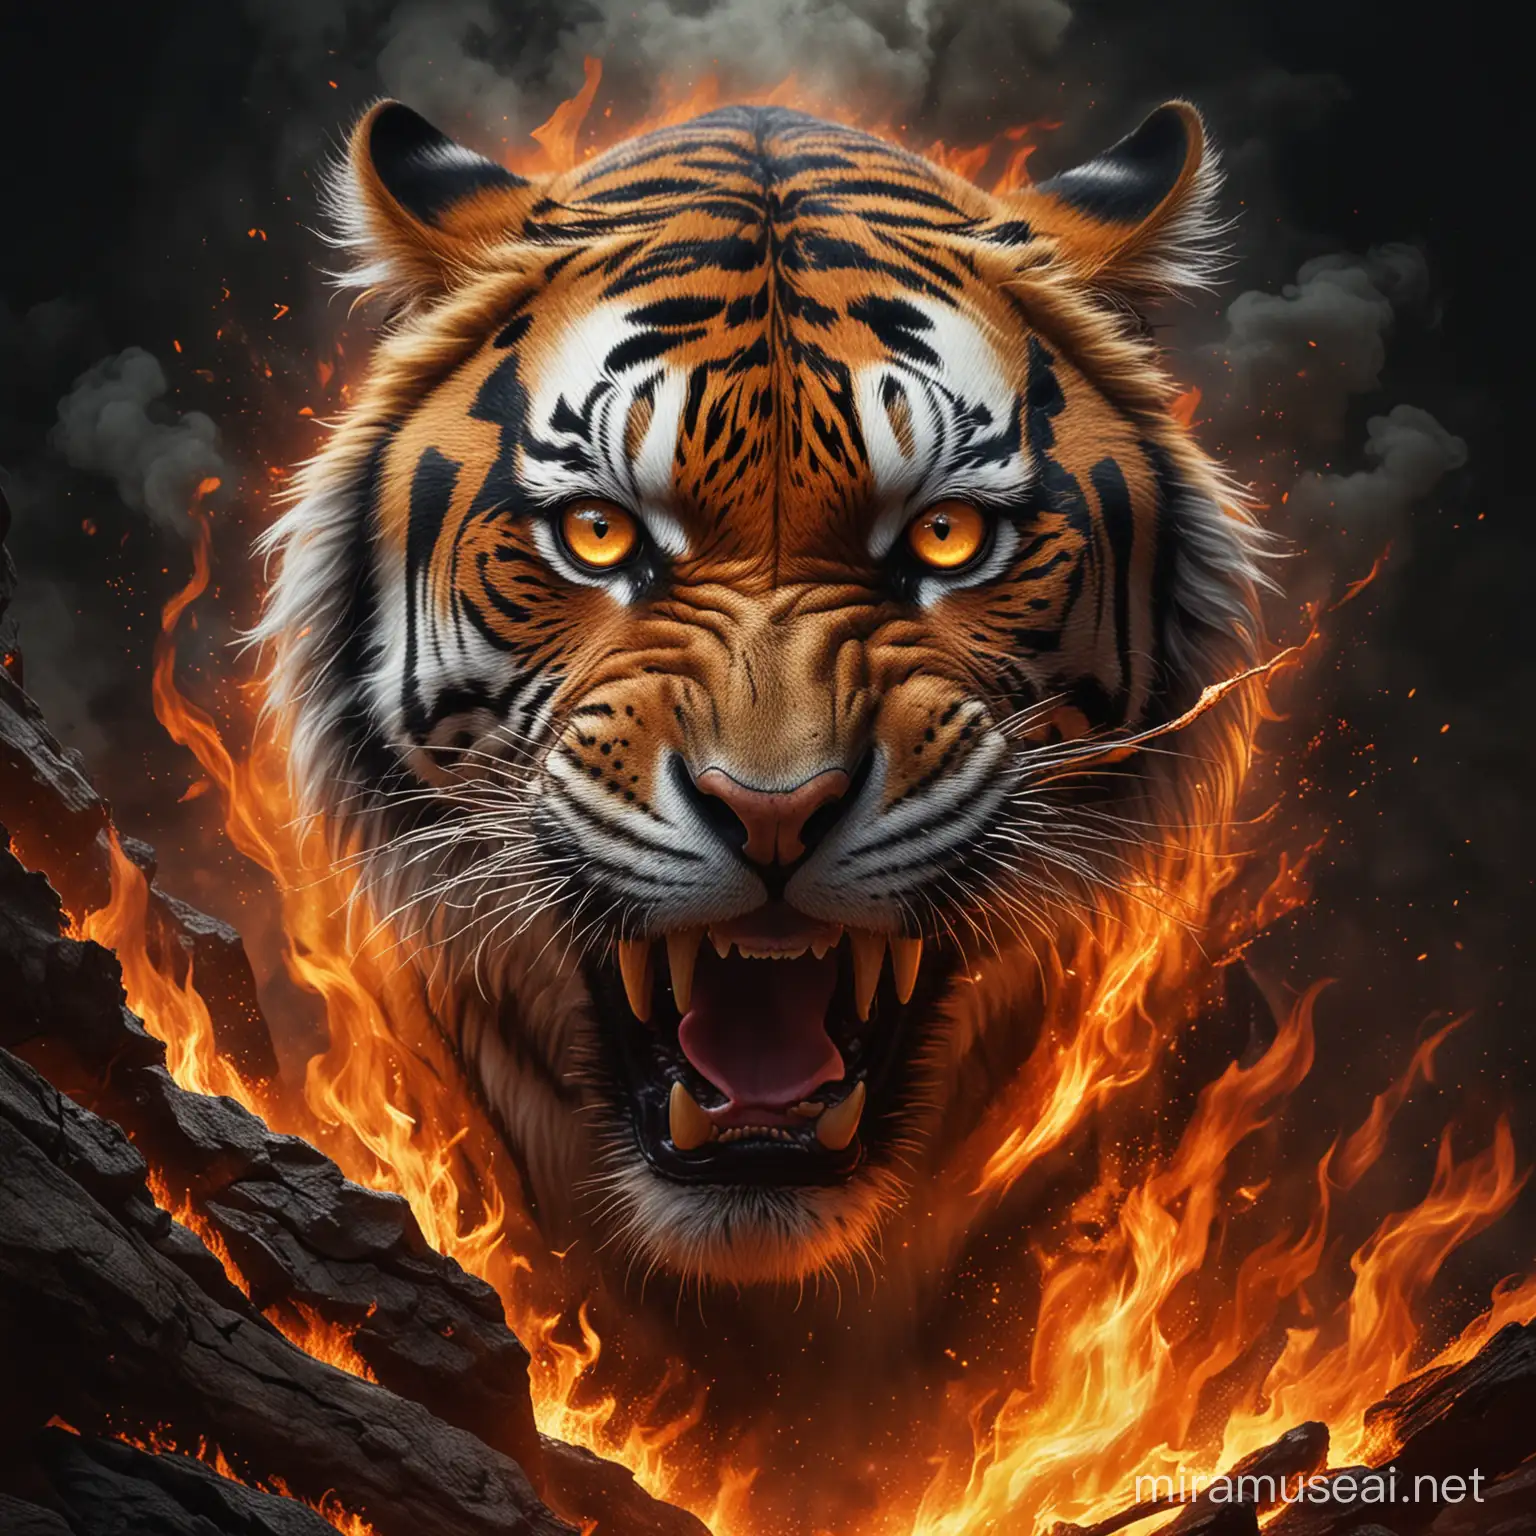 Ferocious Tiger Emerges from Flames in HyperRealistic Poster